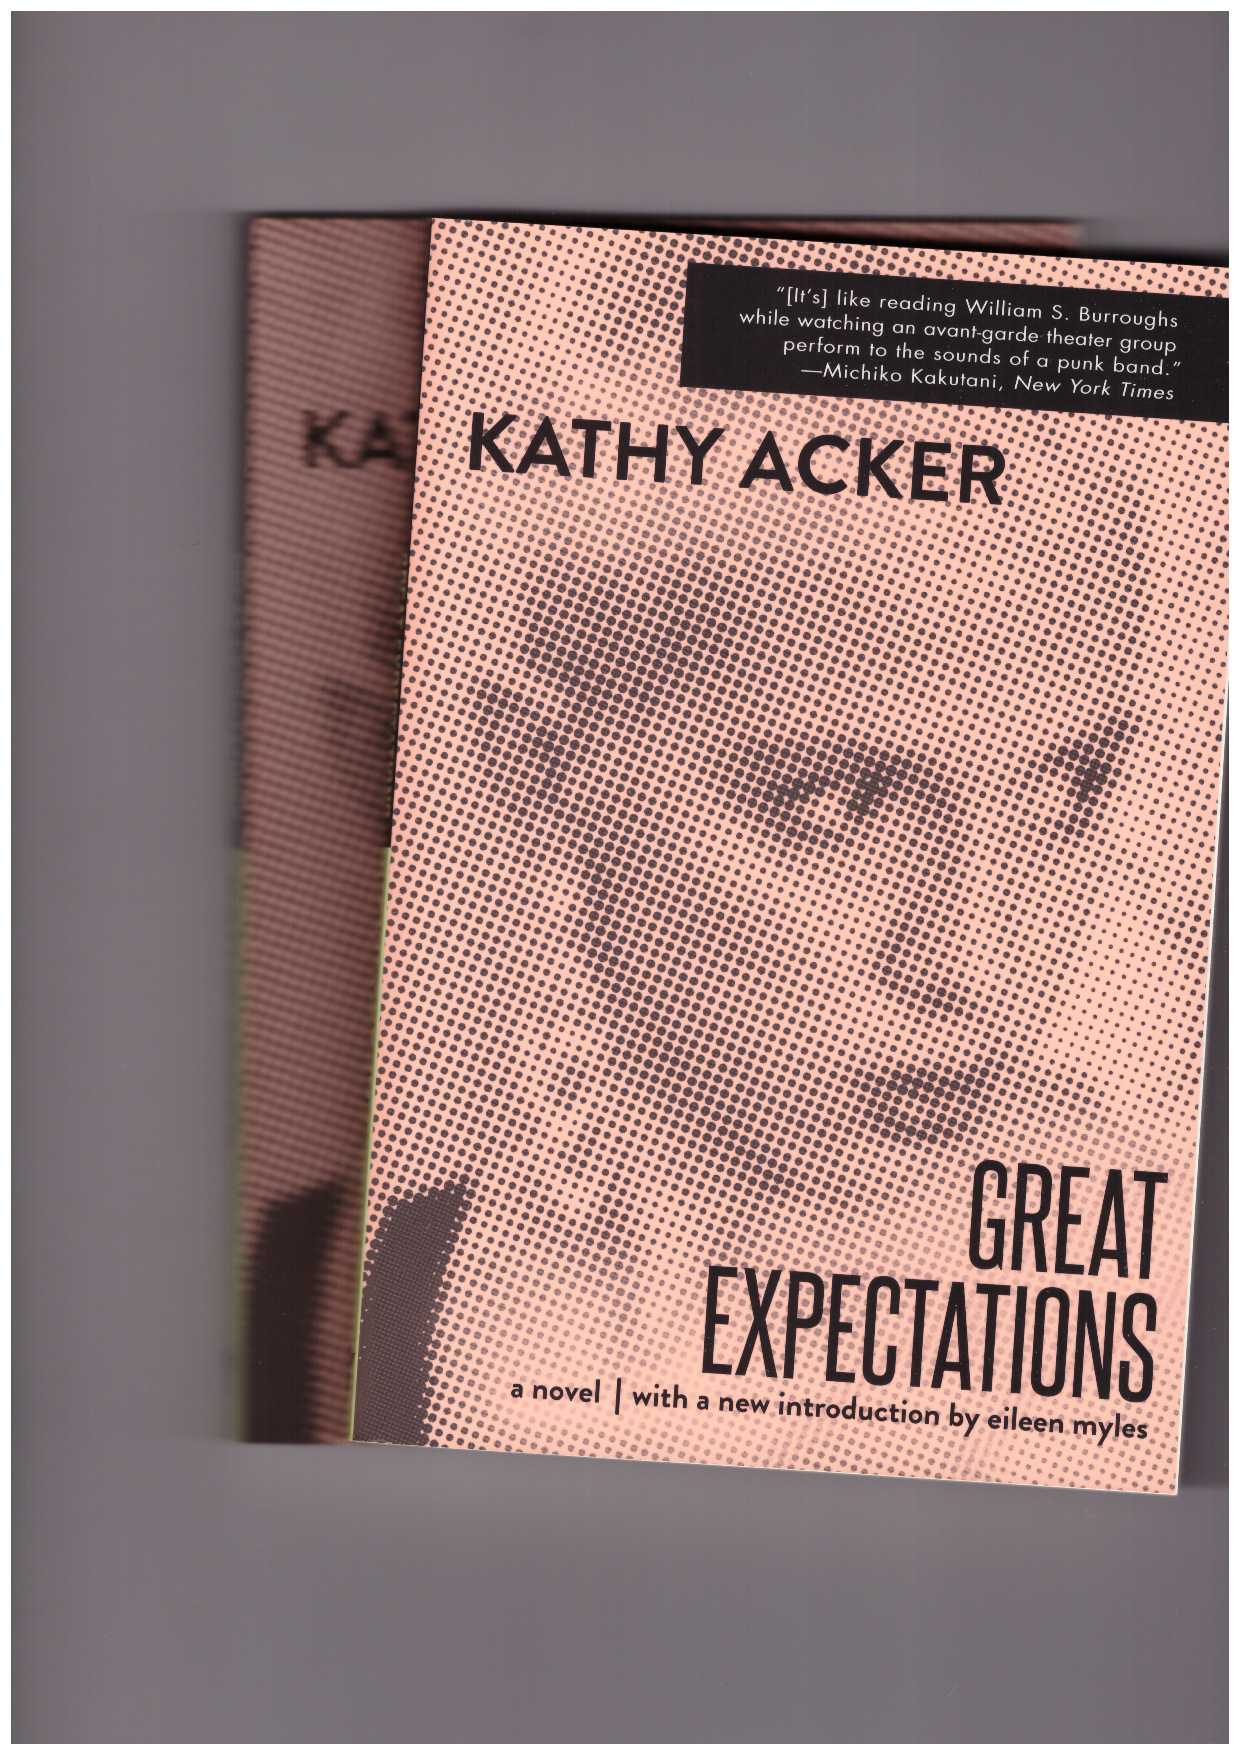 ACKER, Kathy - Great Expectations (reissue)